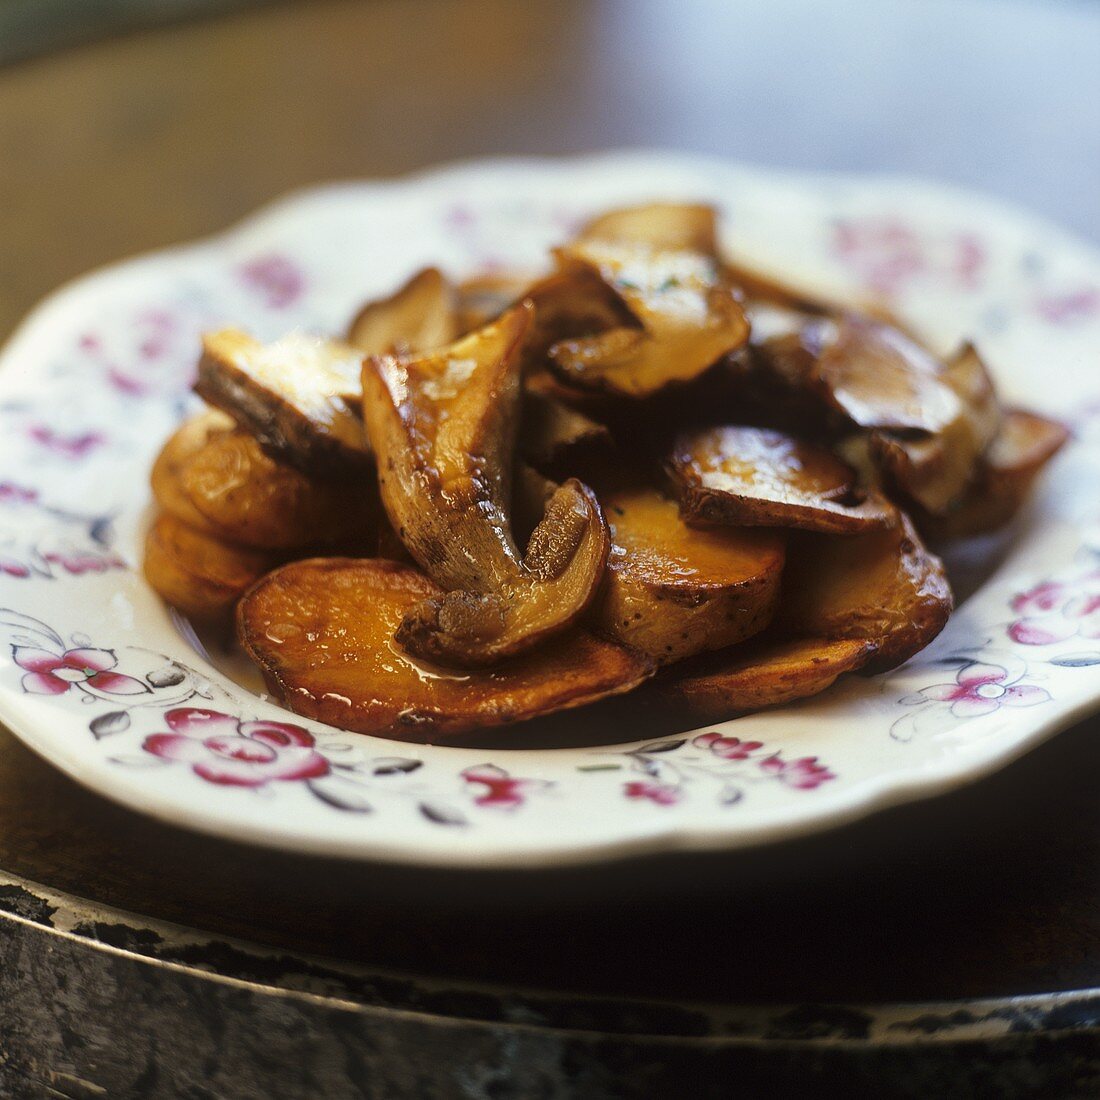 Pan-cooked ceps and potatoes